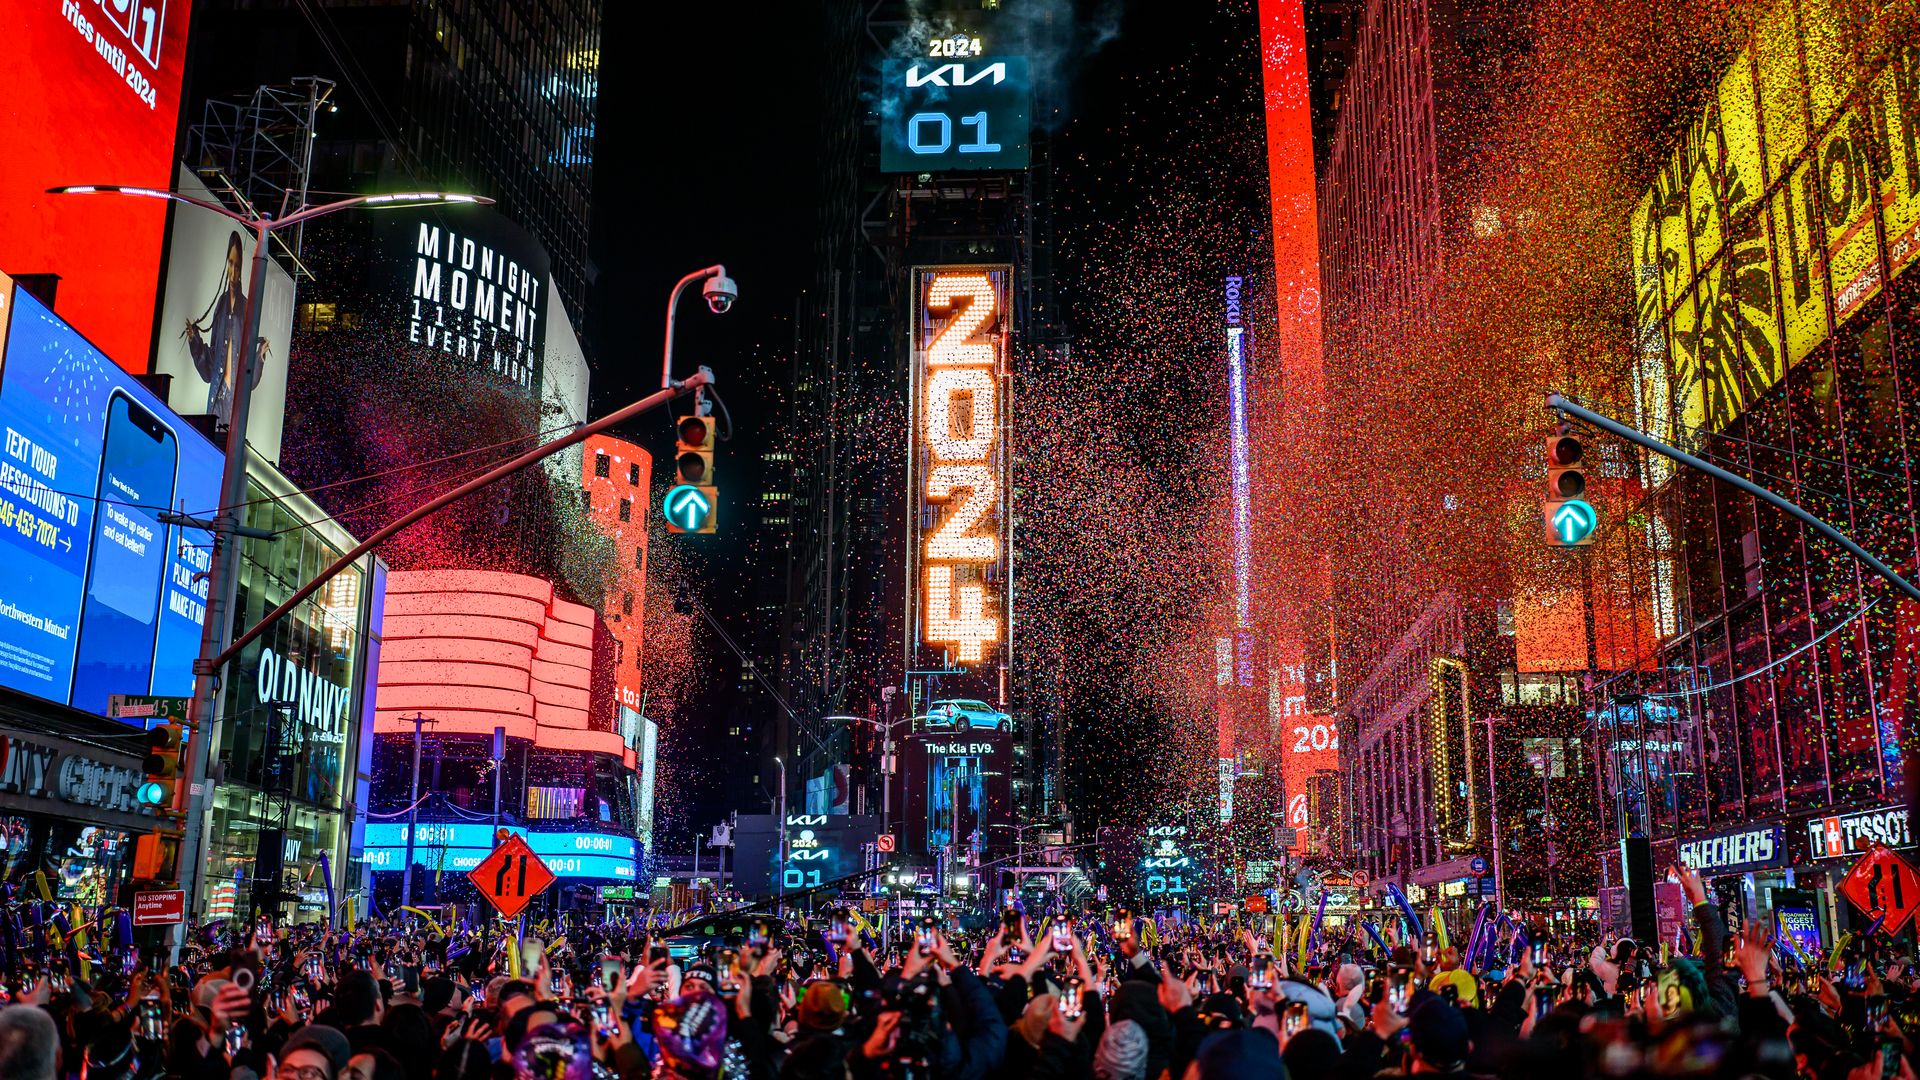  Confetti fills the sky as the countdown to the new year is marked by the Ball Drop and fireworks during the Times Square New Year's Eve 2024 Celebration on December 31, 2023 in New York City.